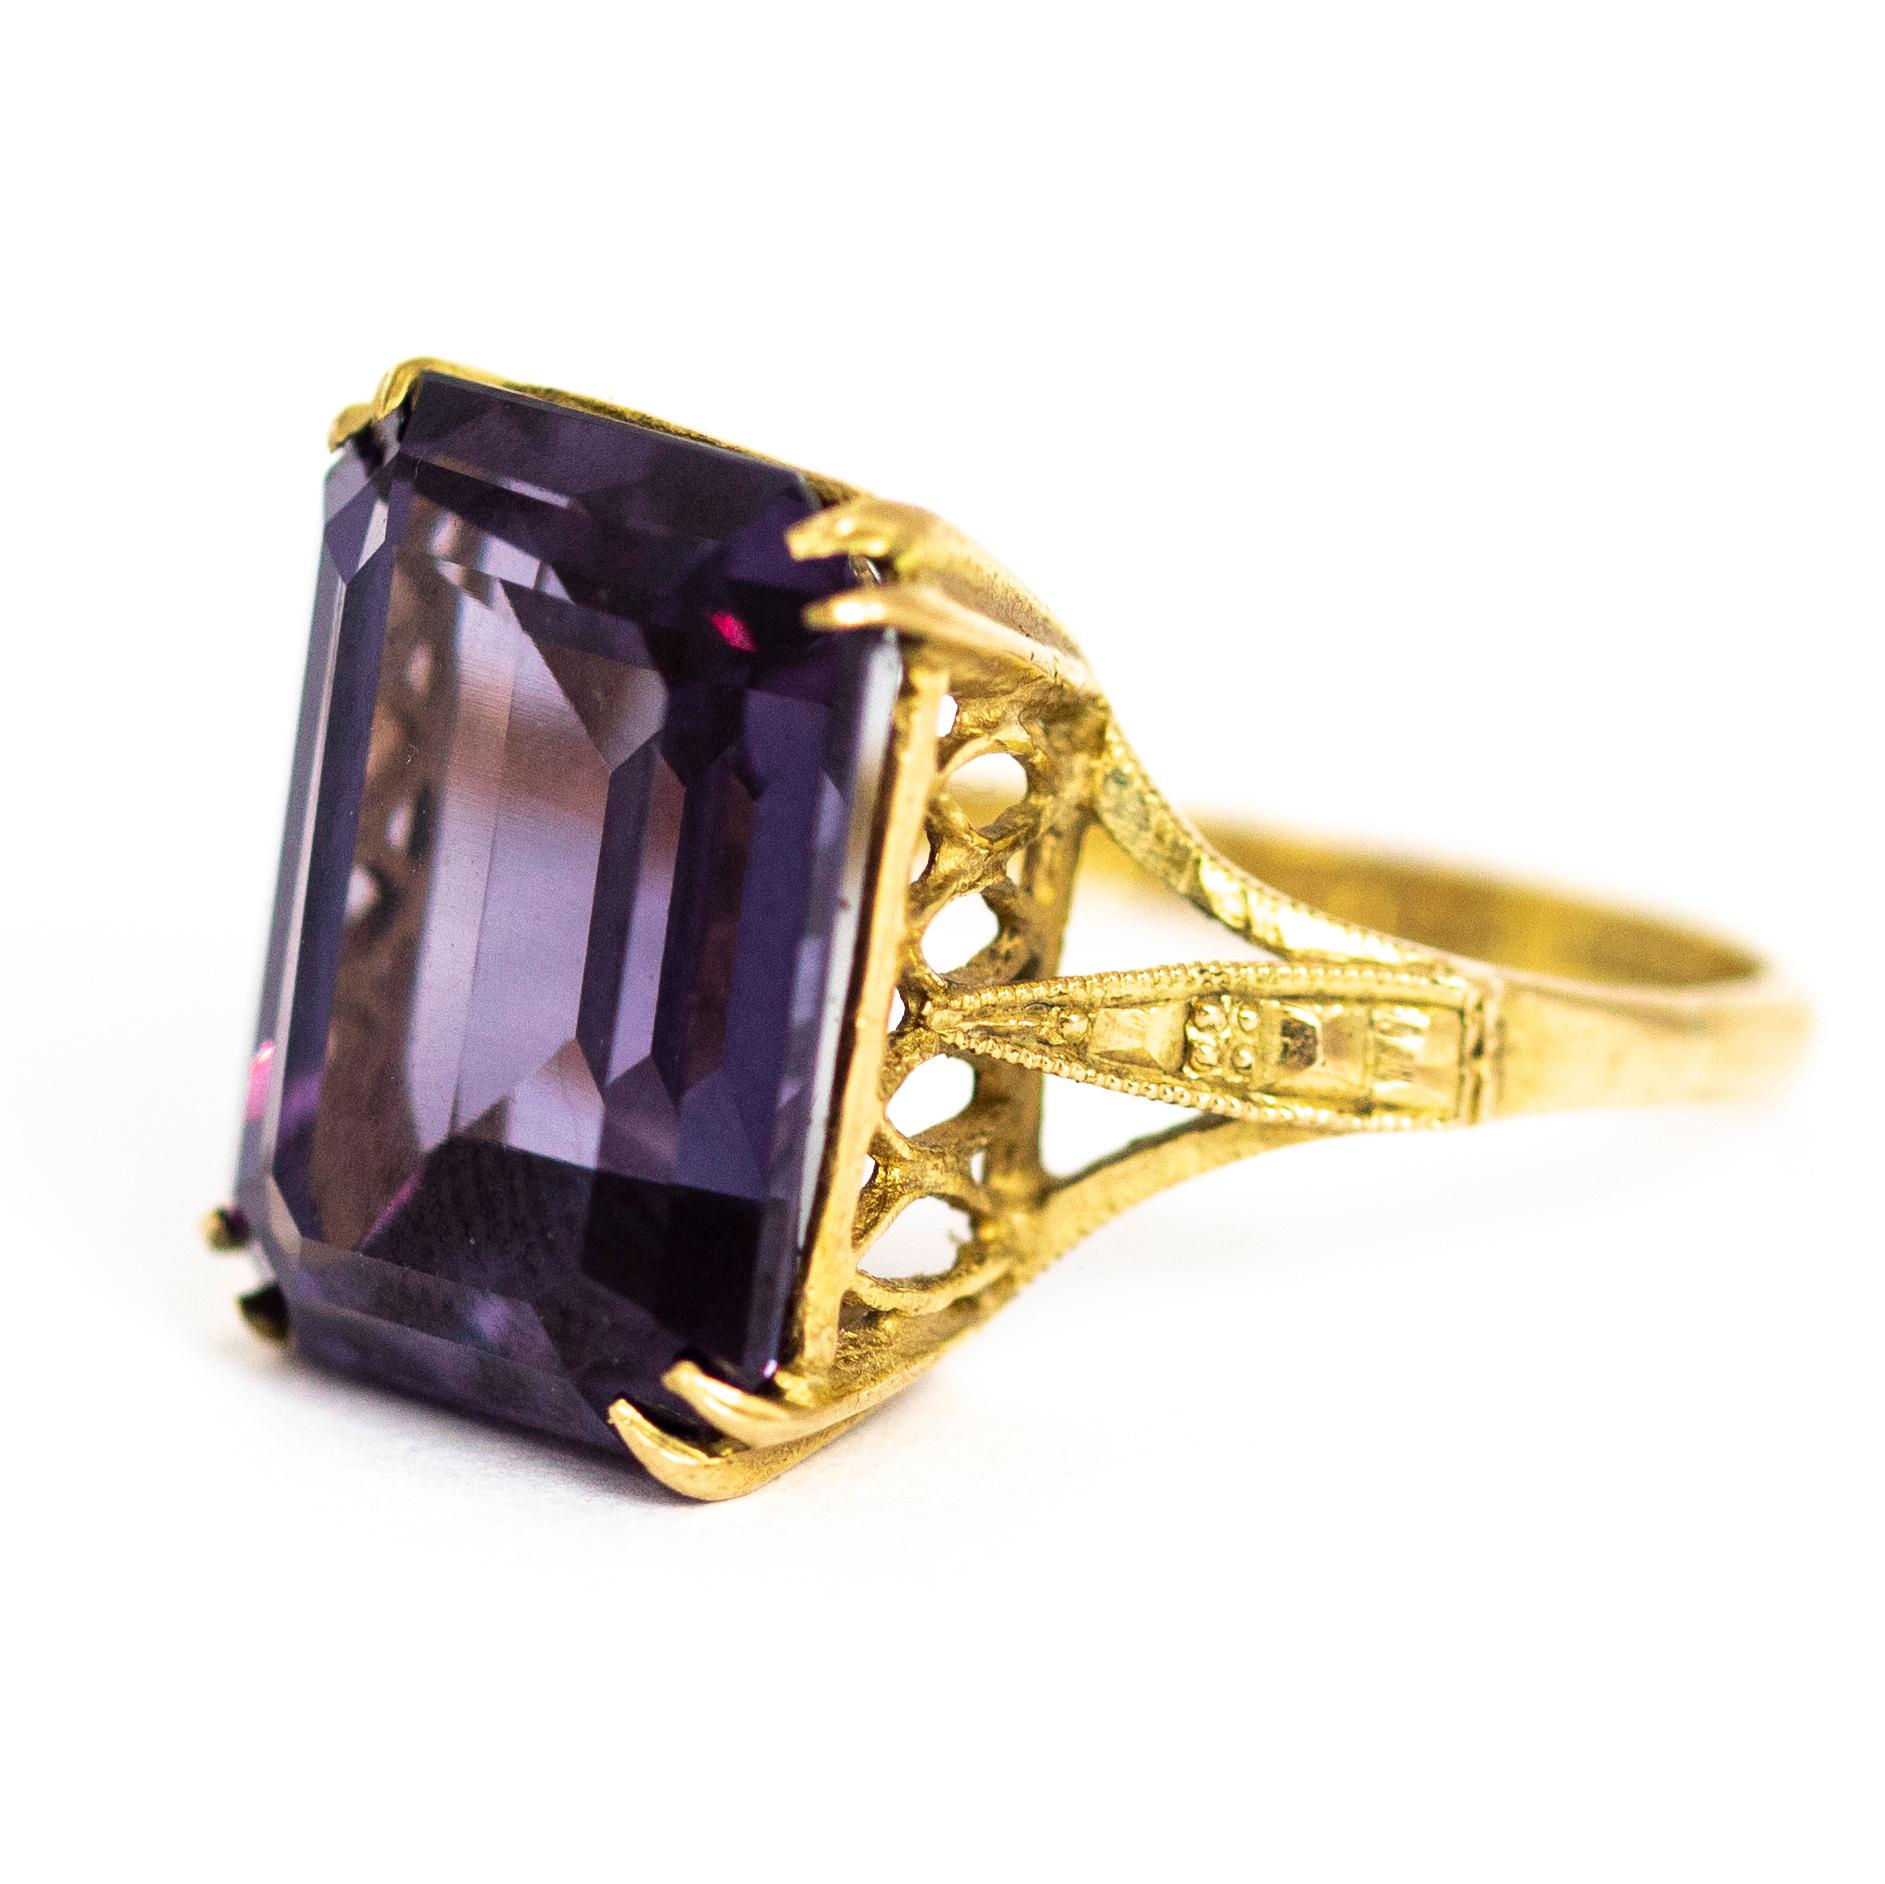 A stunning vintage 1960s cocktail ring set with a wonderful deep purple emerald cut amethyst. The stone is set in a beautiful open lattice gallery. Modelled in 9 carat yellow gold. Fully hallmarked 1961 Birmigham, England.

Ring Size: UK O, US 7